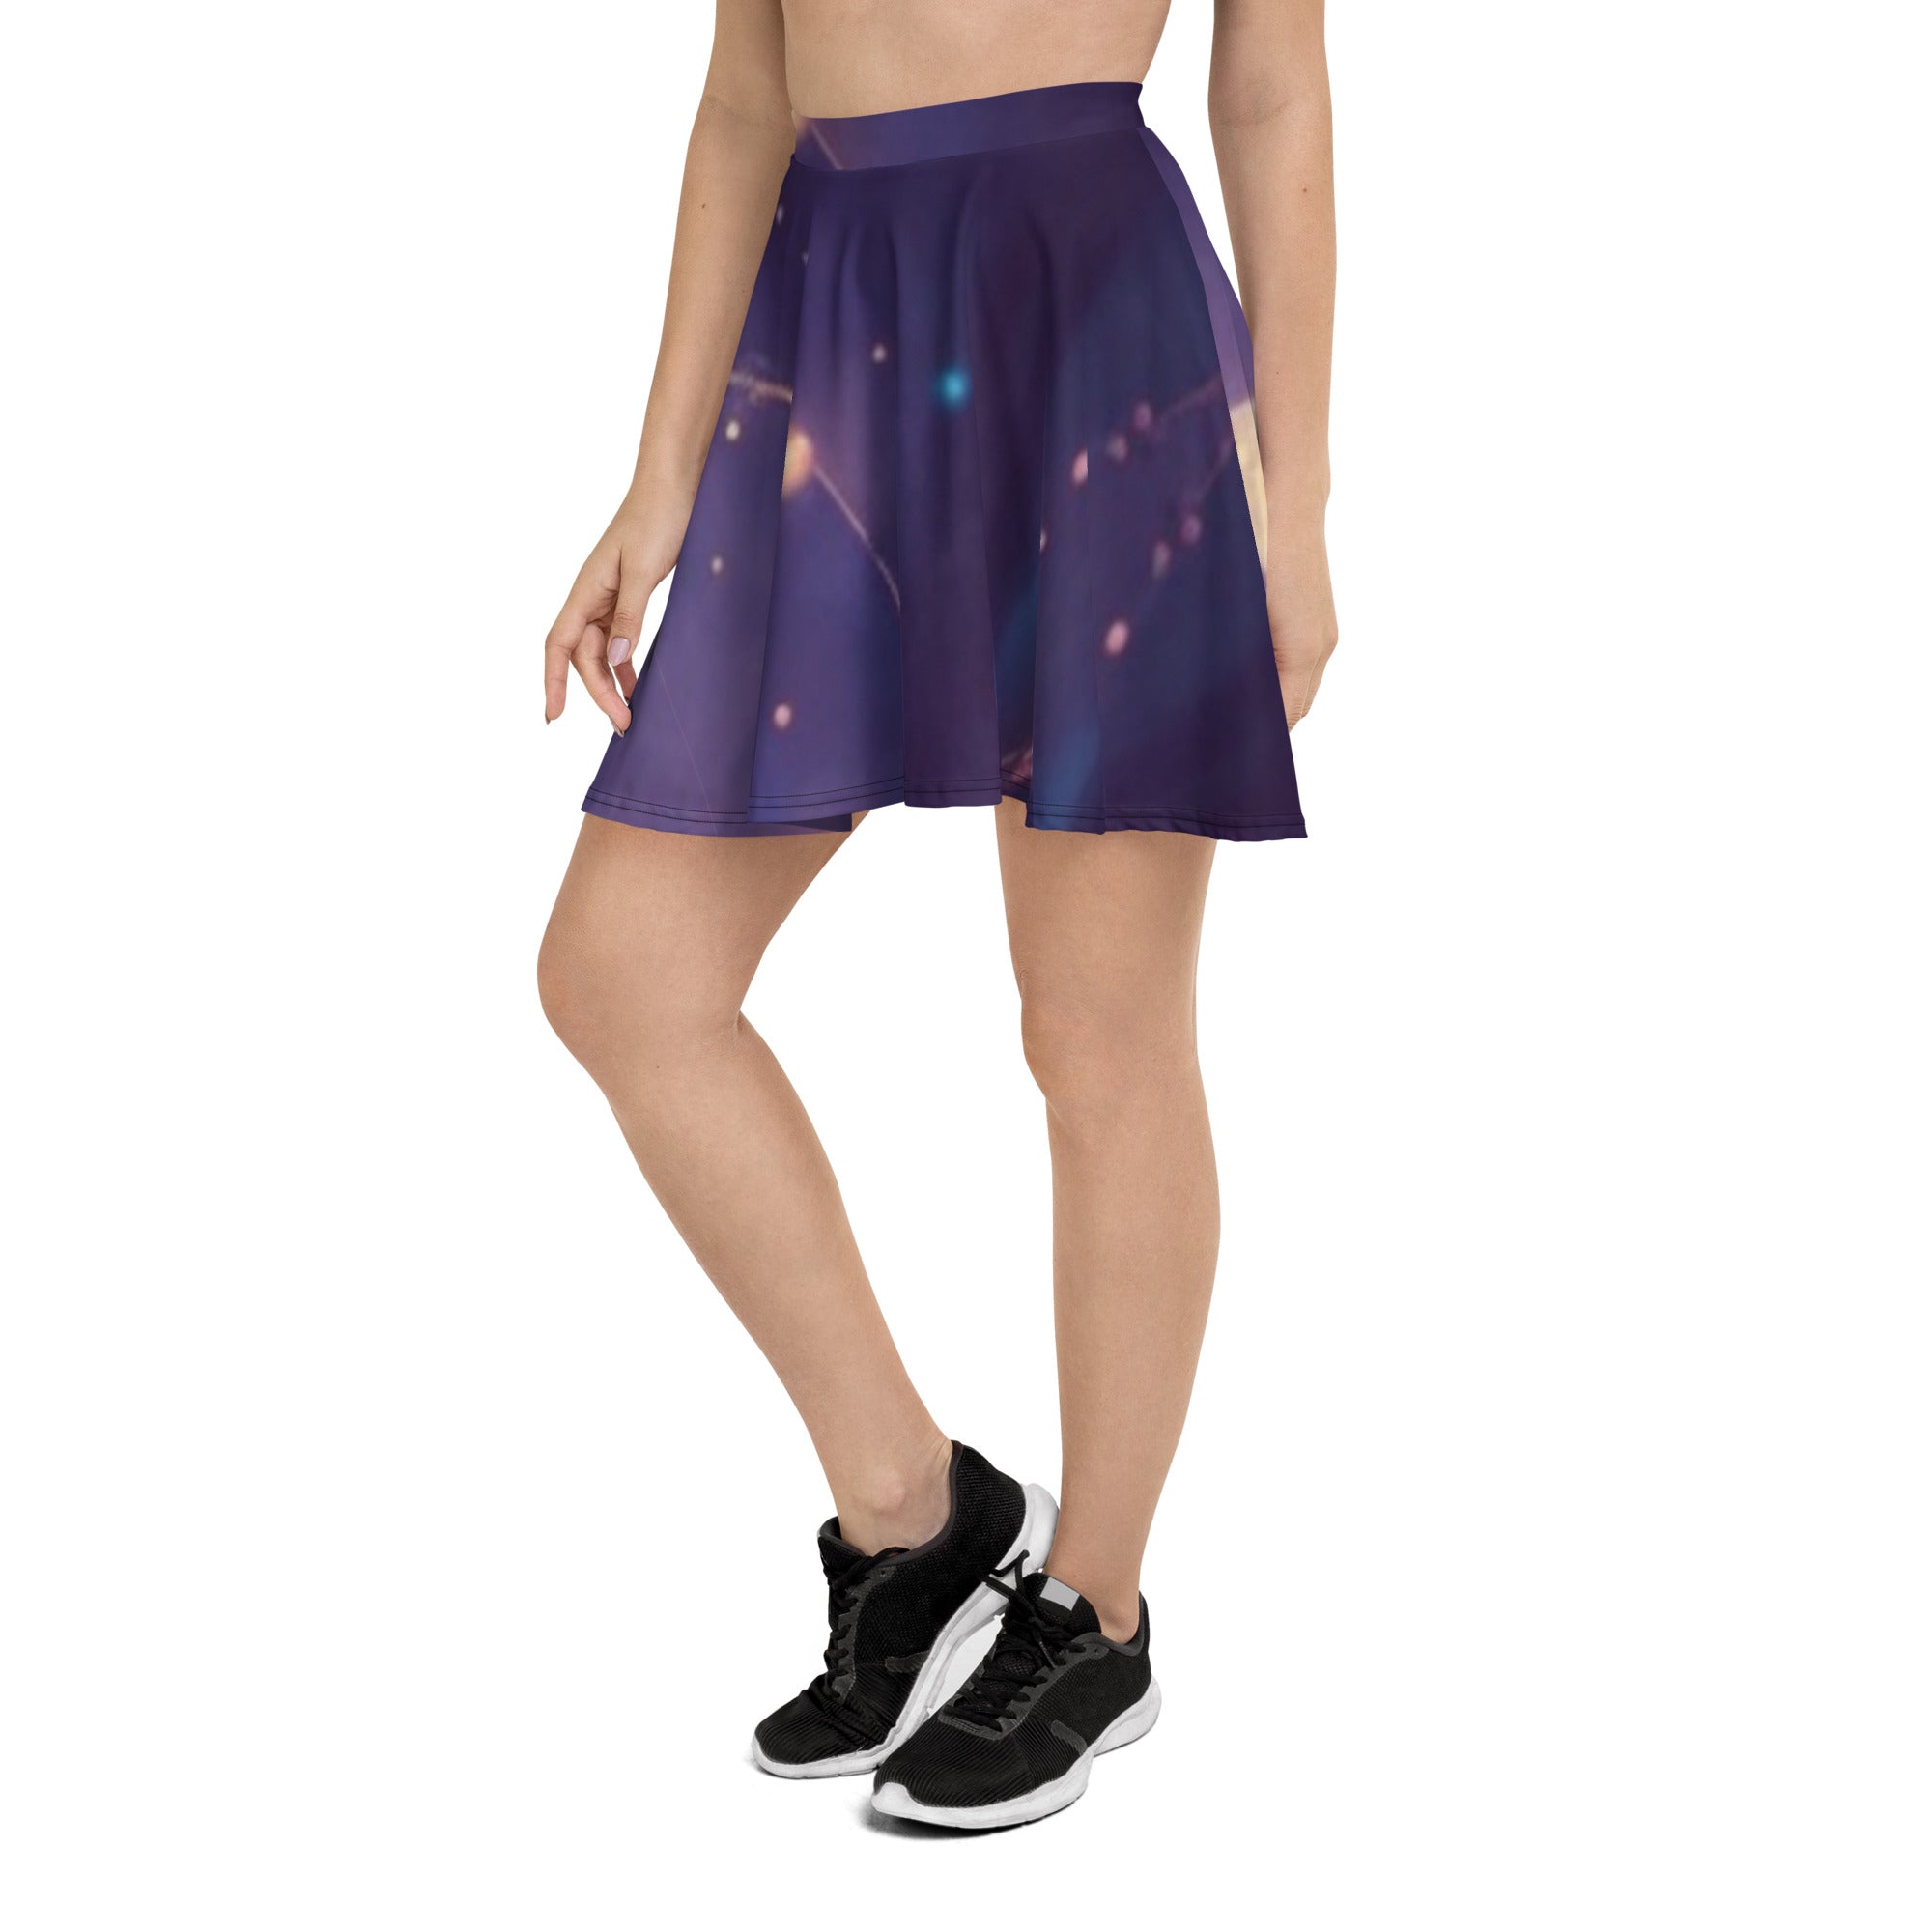 Radiate Confidence: Step into the Spotlight with Our Super-Stylish Shiny Purple Skater Skirt!